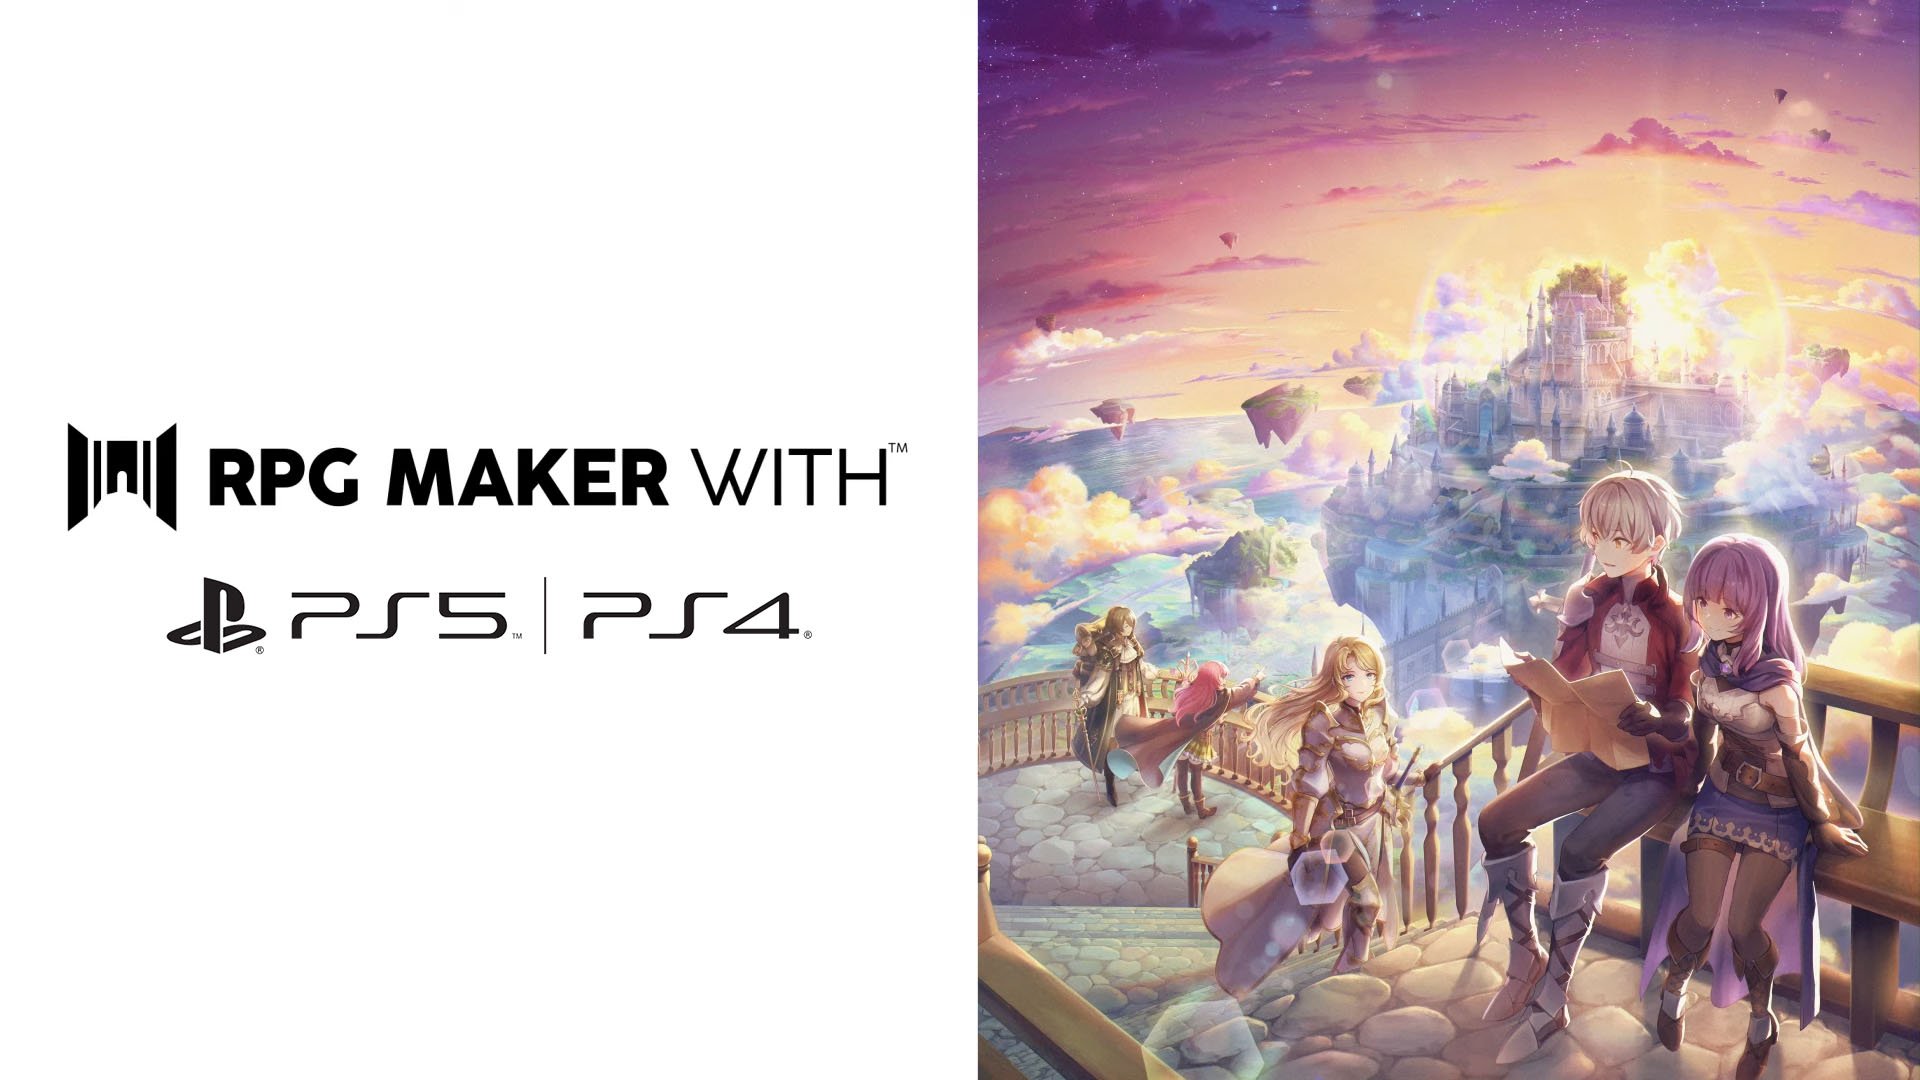 #
      RPG Maker WITH adds PS5, PS4 versions